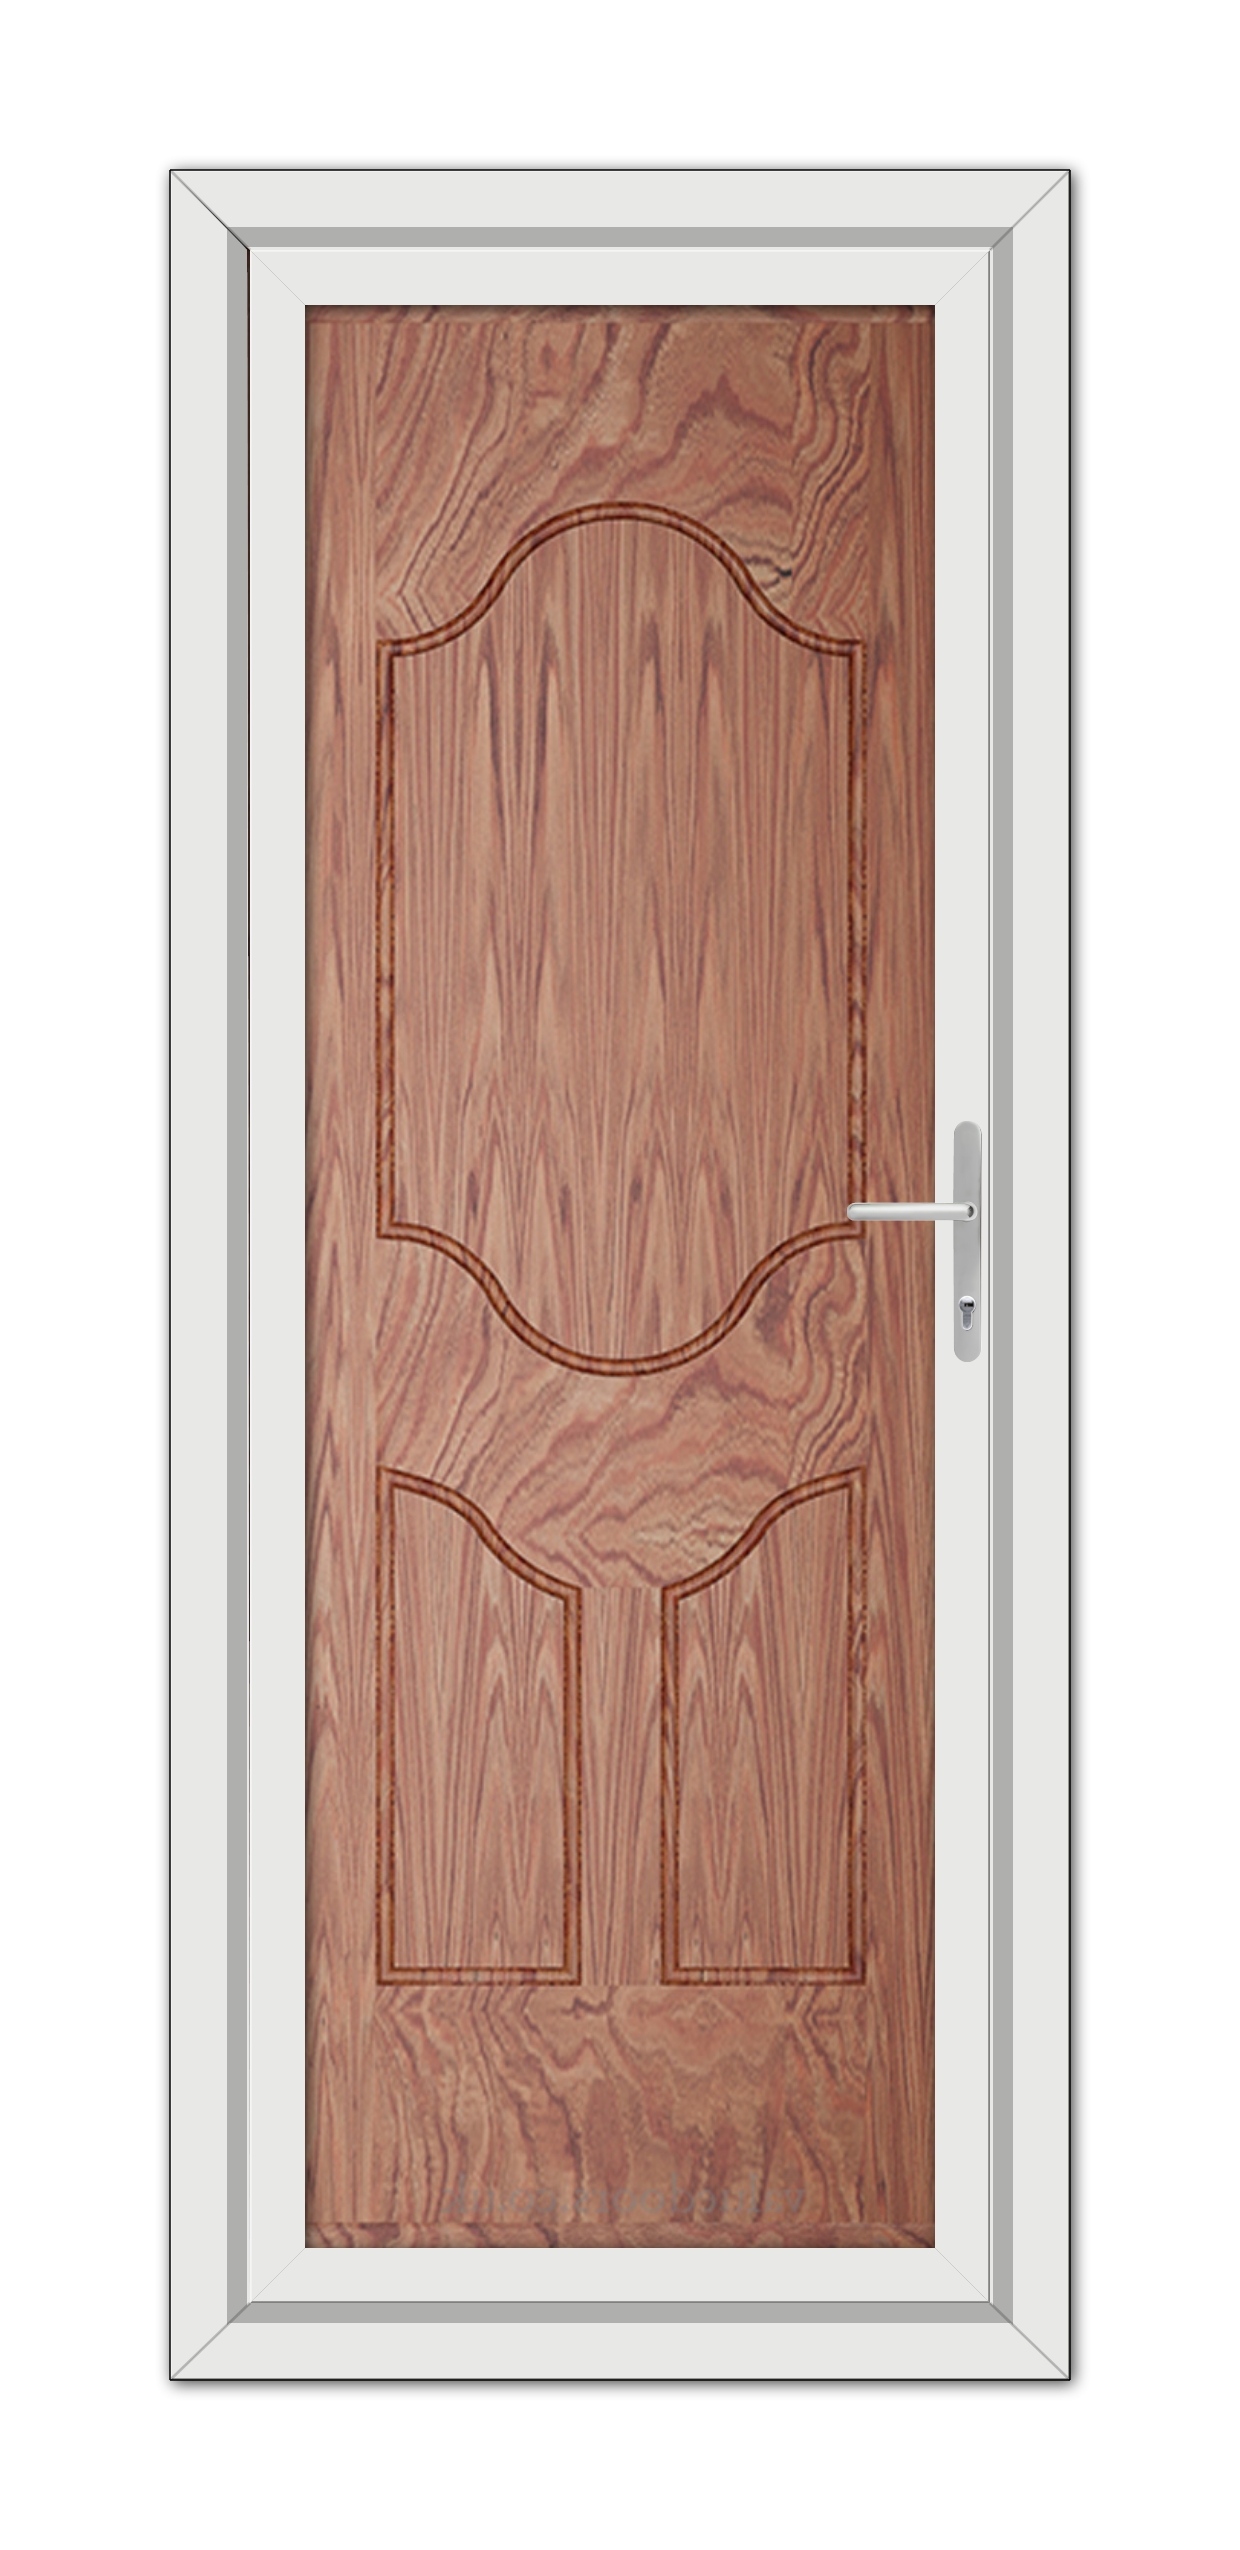 A Solid Oak Althorpe Solid uPVC Door with a prominent grain pattern, featuring an arched top panel, fitted within a white frame, equipped with a modern metal handle.